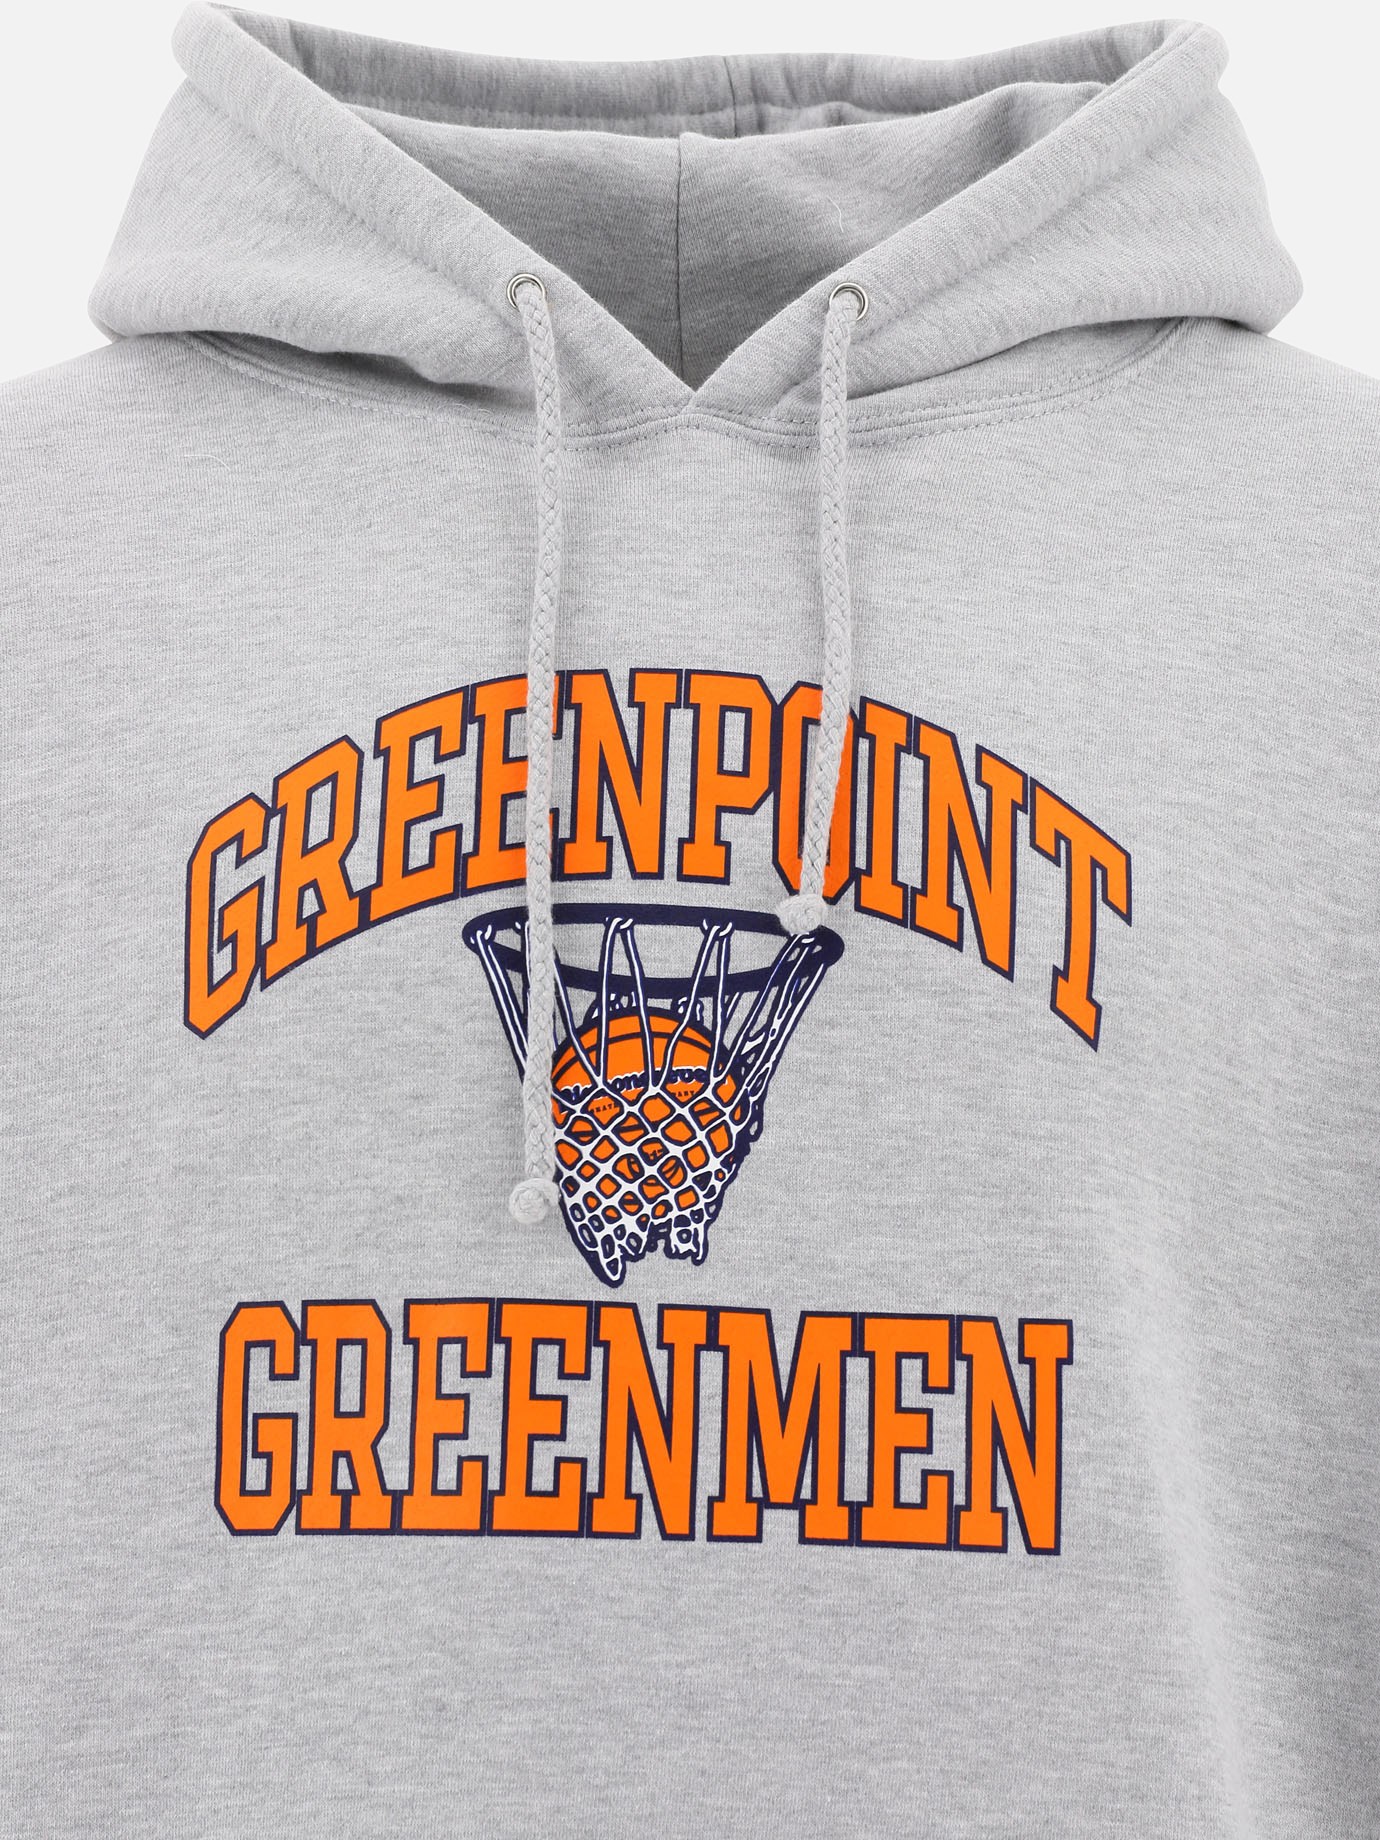  Greenpoint  hoodie by Call Me 917